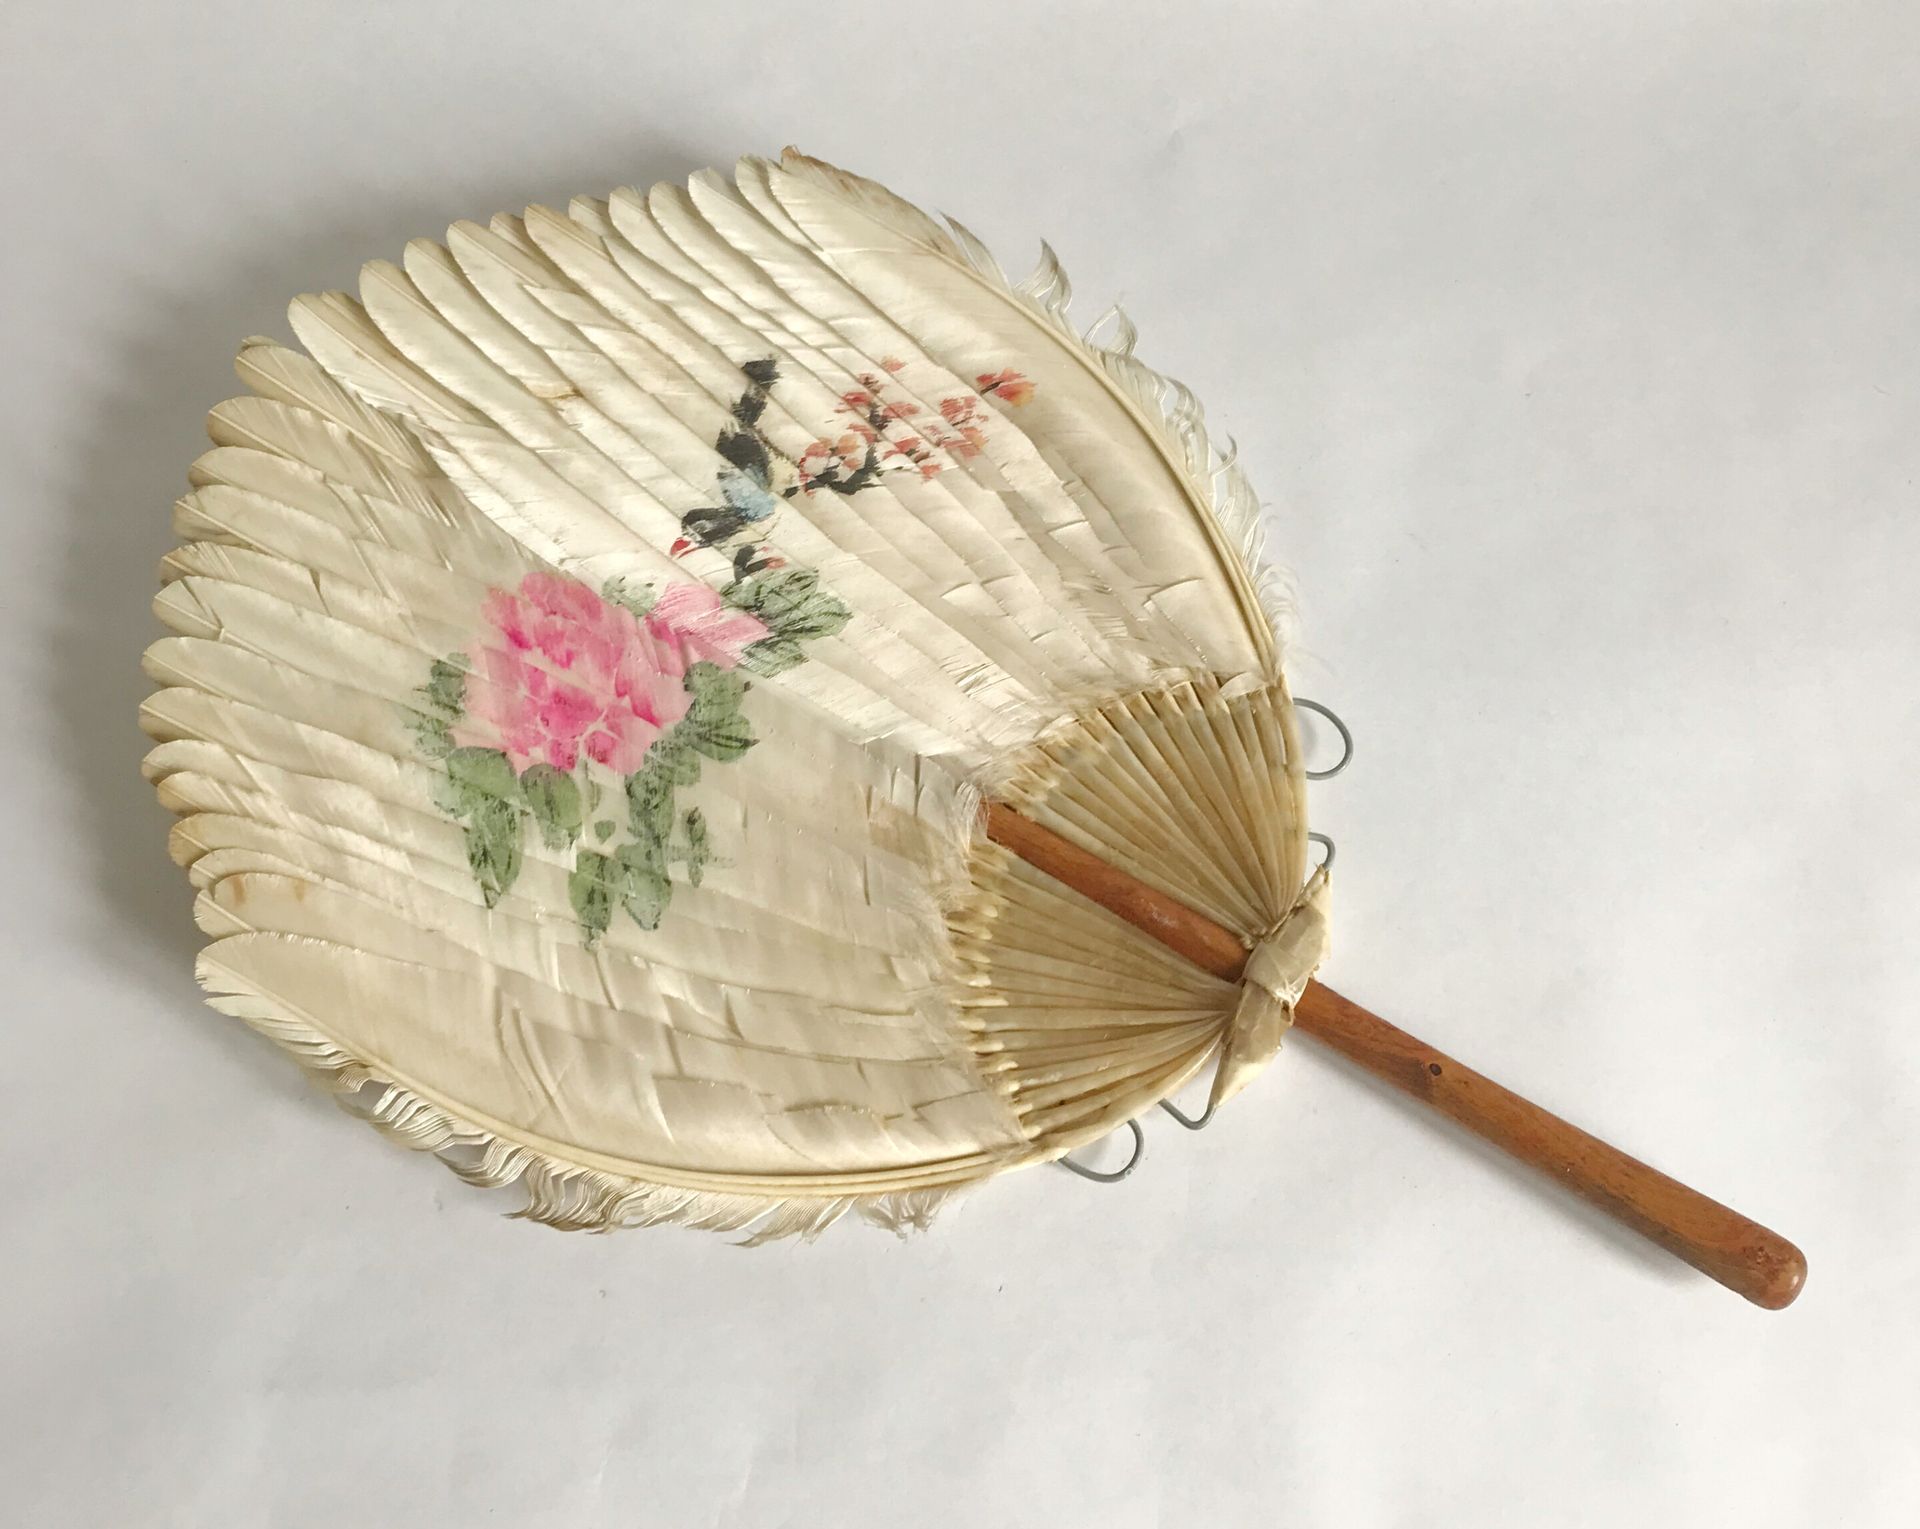 Null Goose feather fan (?) with painted decoration on a wooden handle.

H. 37 cm